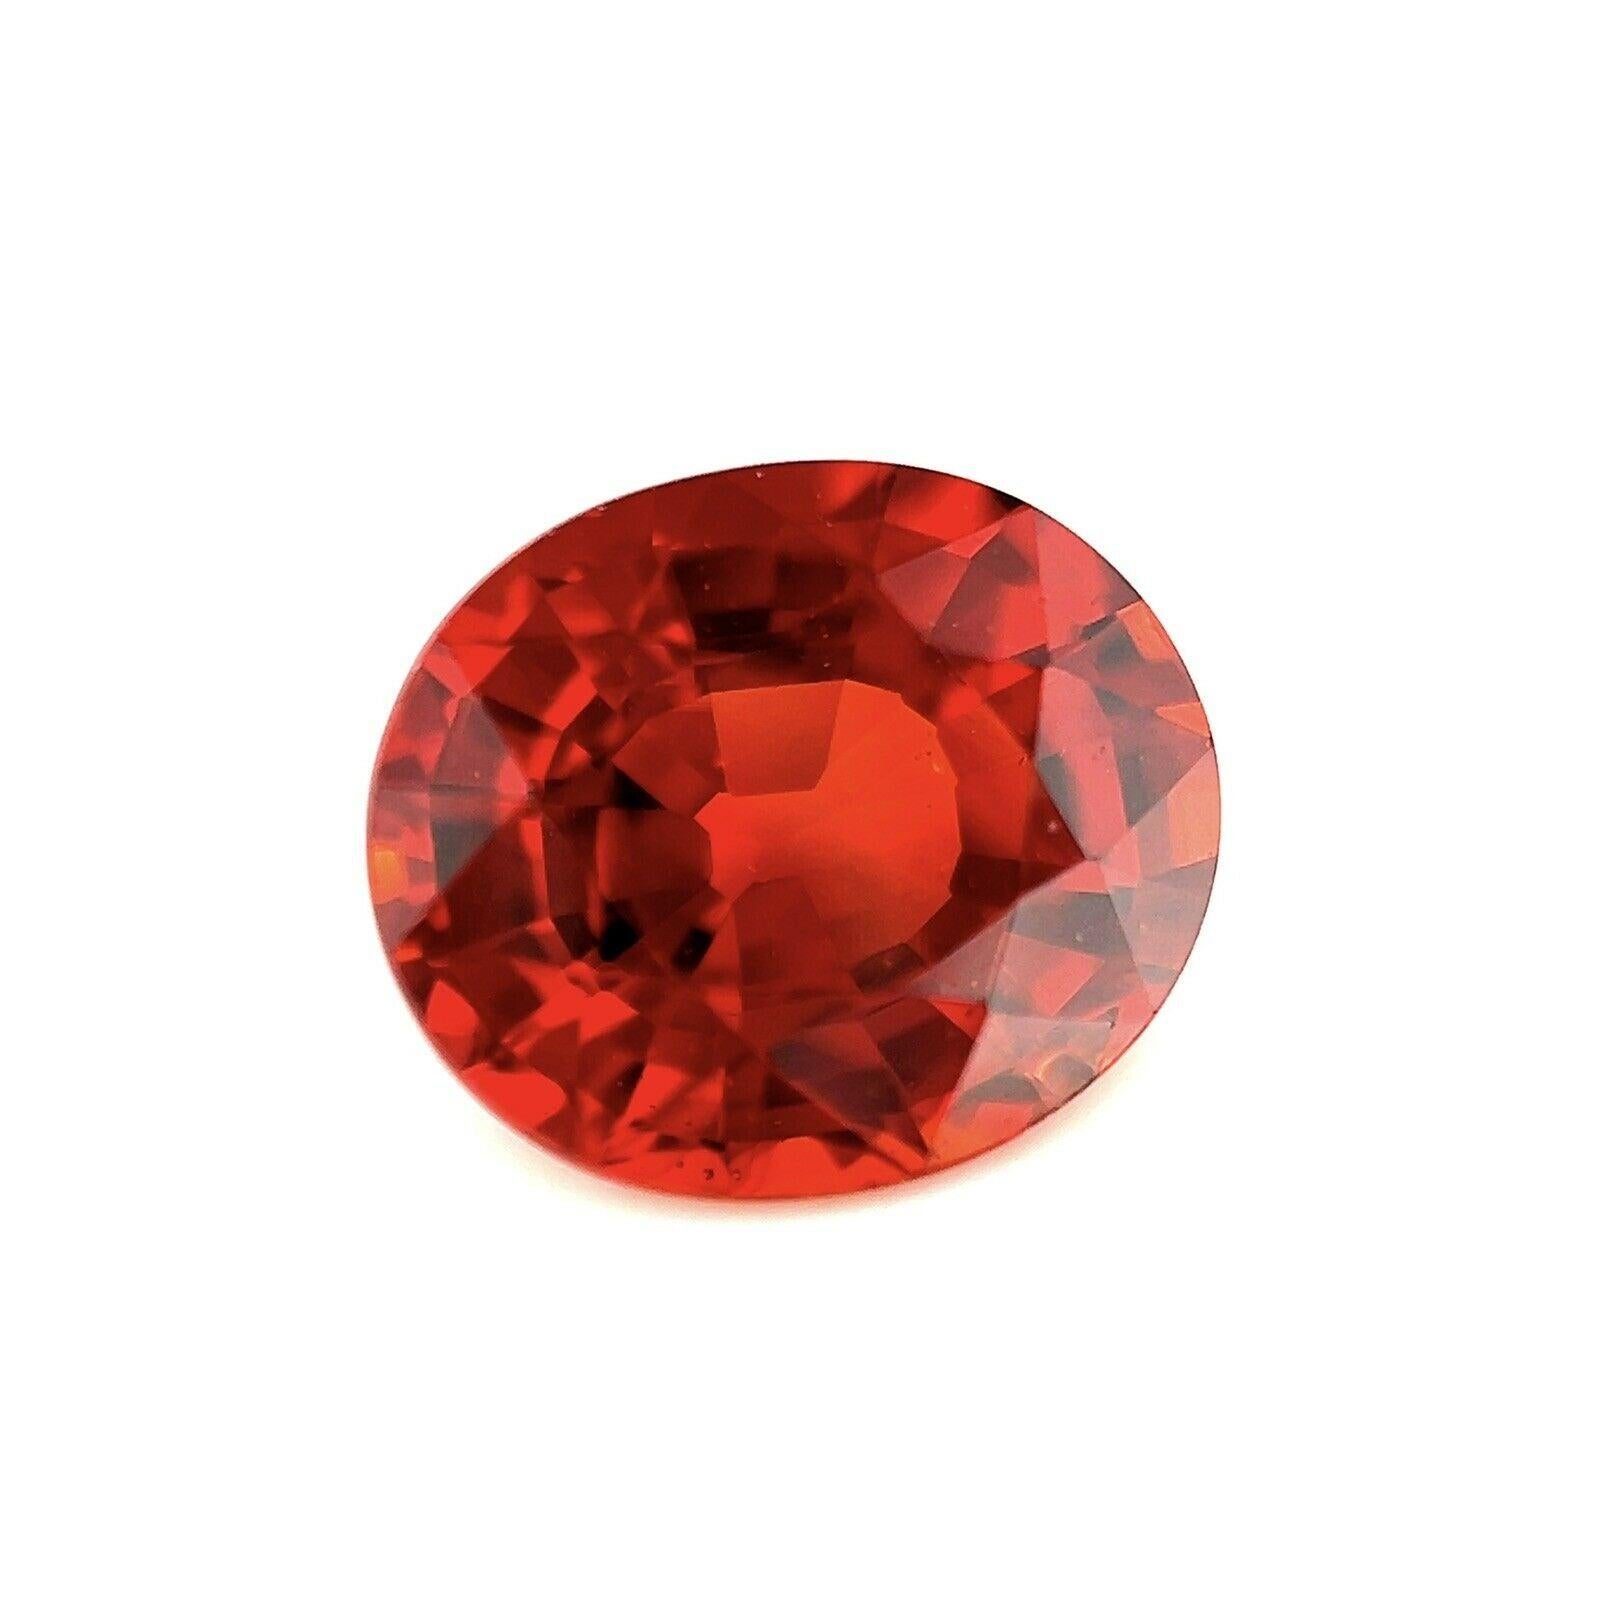 Fine 2.51ct Vivid Orange Red Spessartine Garnet Oval Cut Loose Gem 8.4x7.3mm

Fine Natural Spessartine Garnet Loose Gemstone.
2.51 Carat with a beautiful reddish orange colour and excellent clarity. Very clean stone with only some small natural